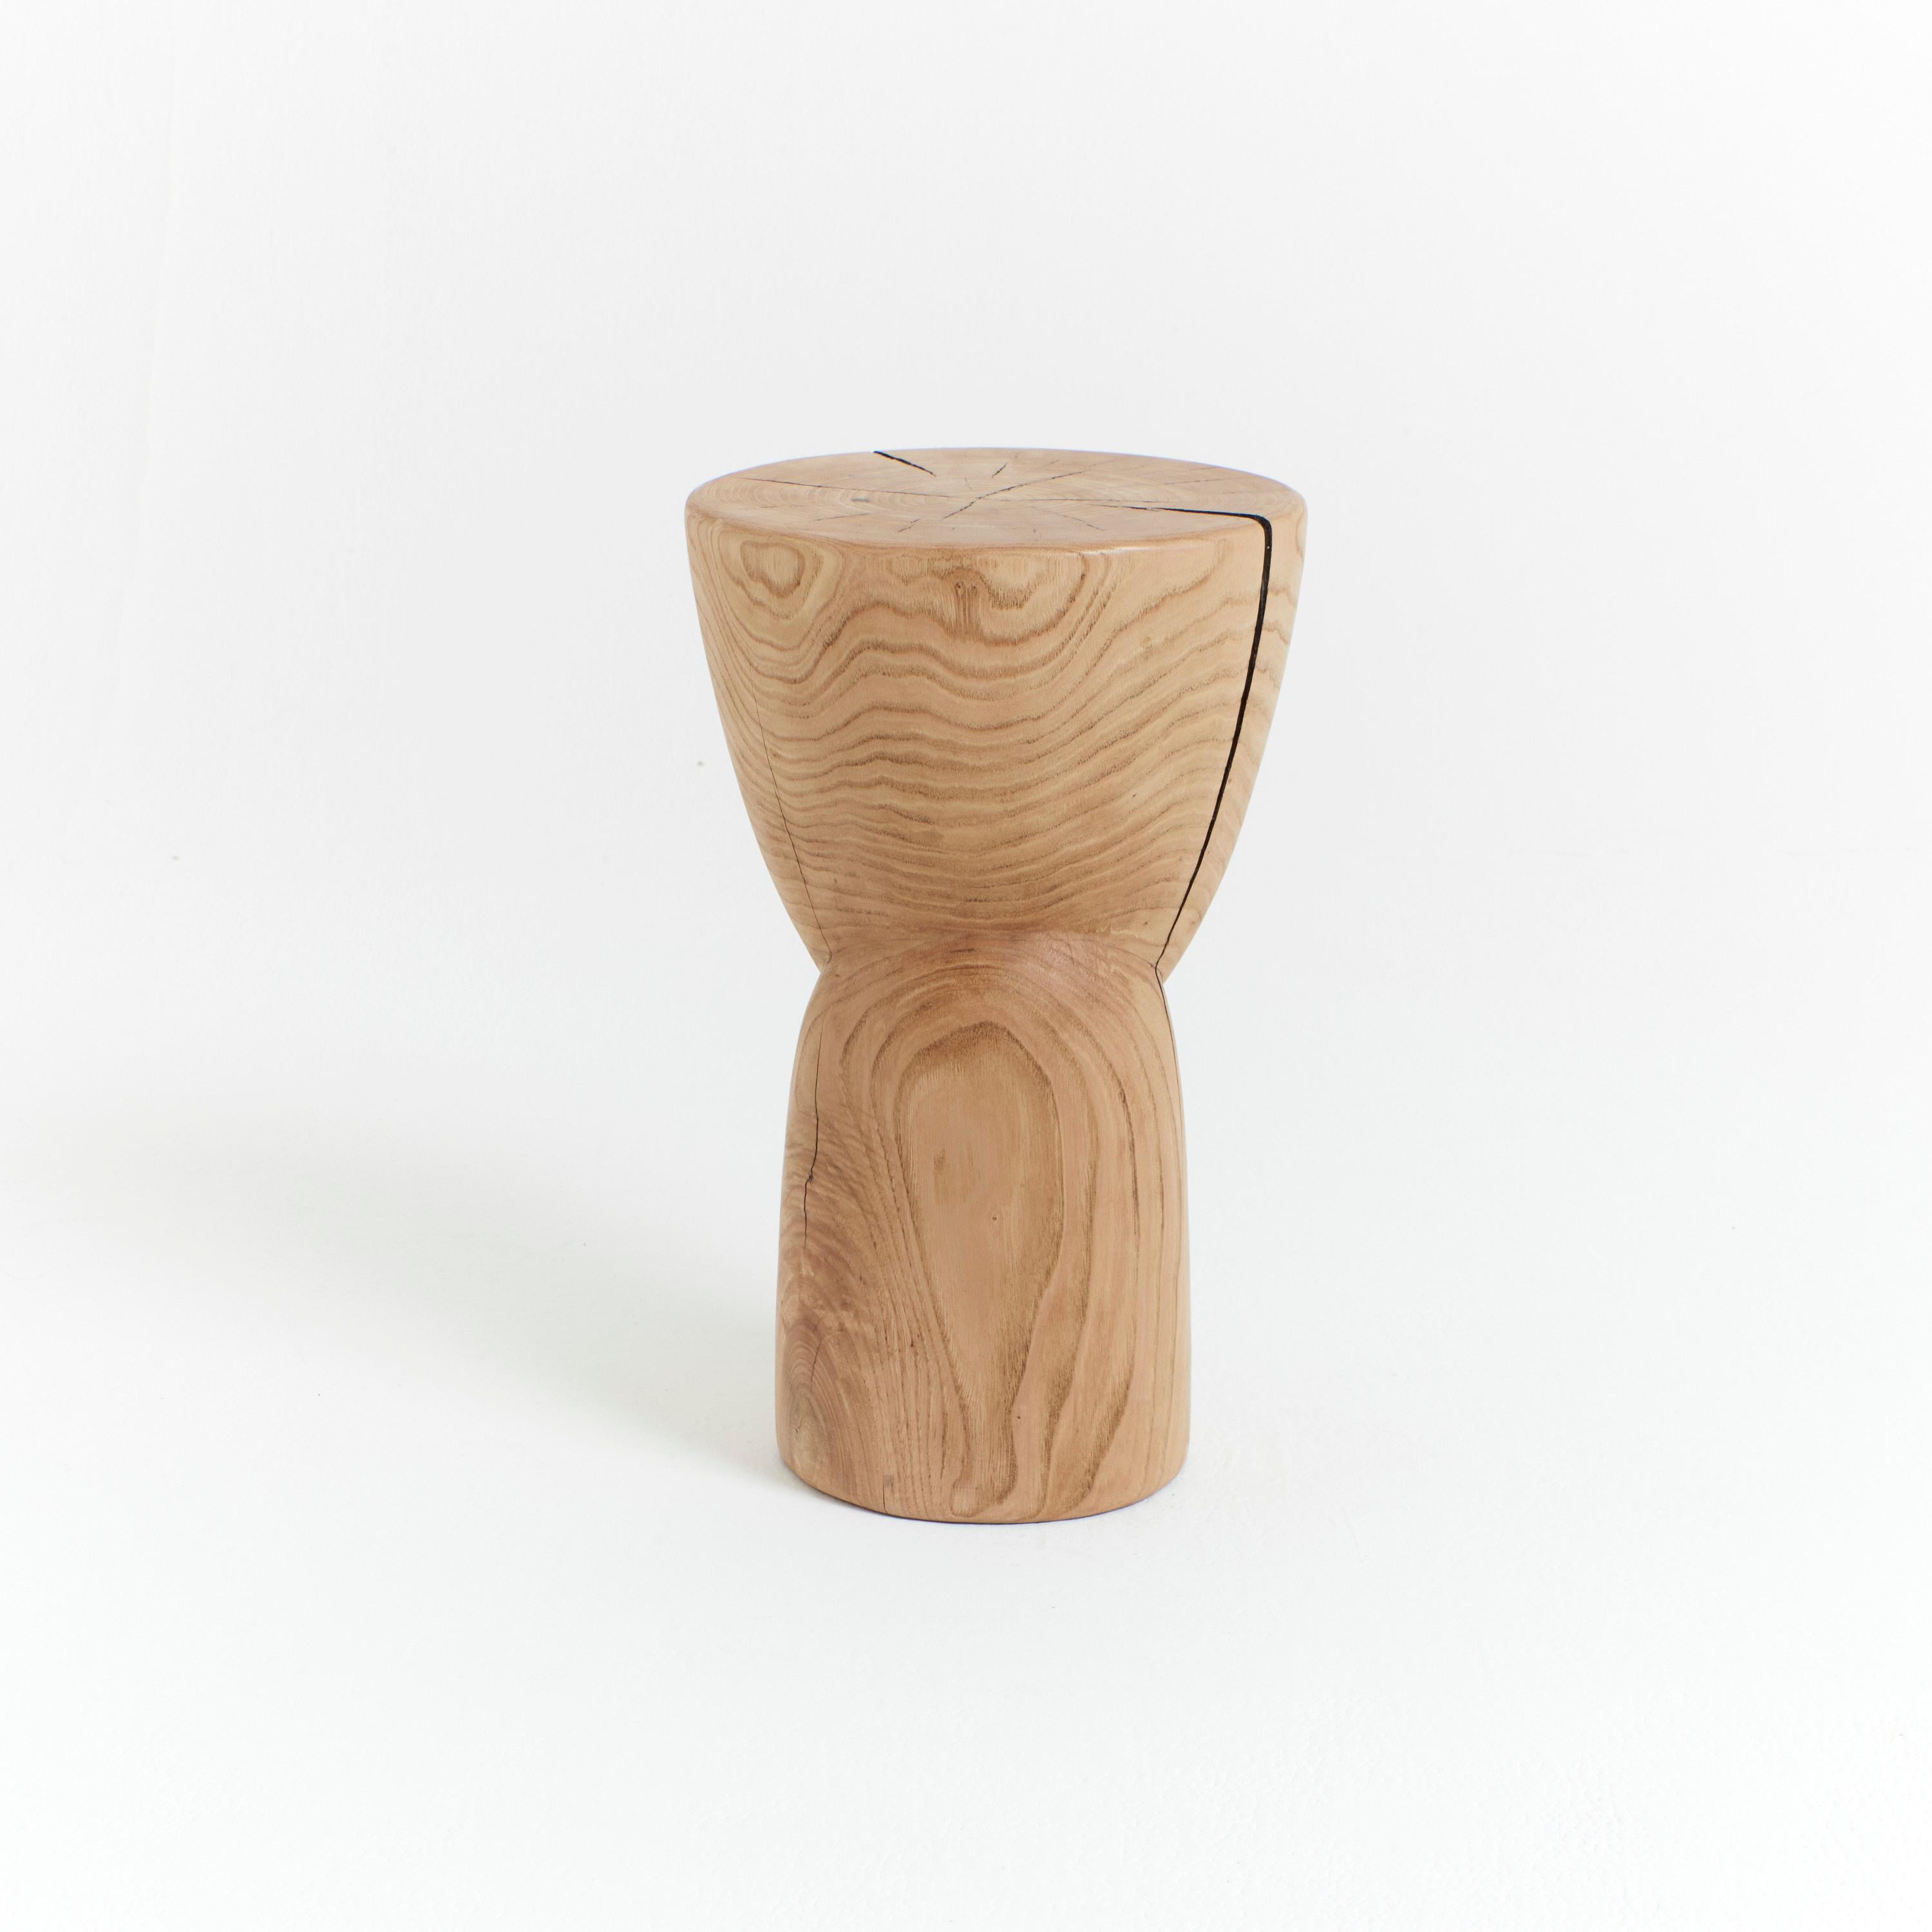 Modern Solid Wood Side Table